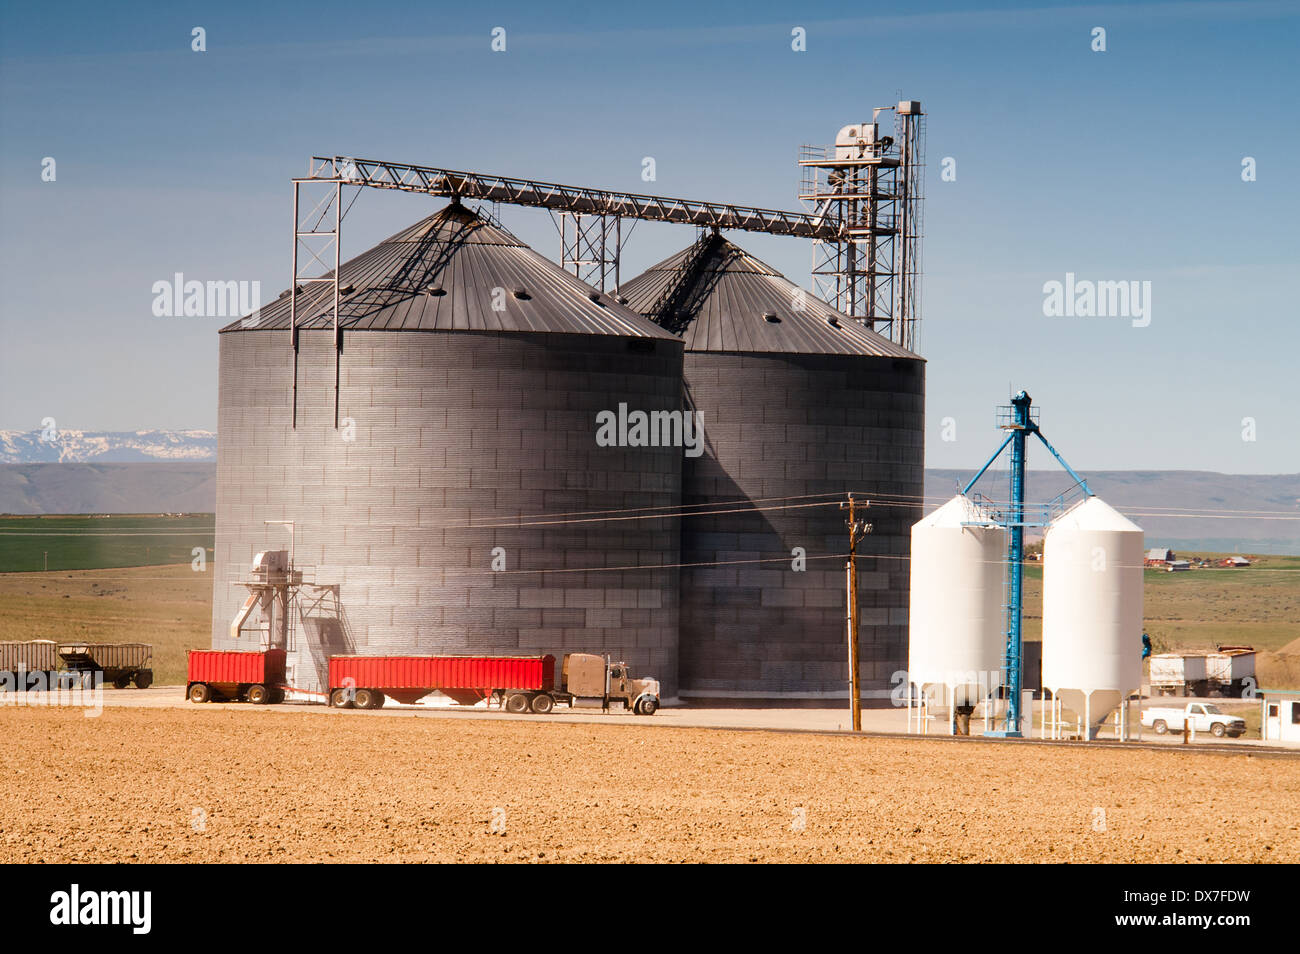 Local agriculture industry loads trucks for shipping Stock Photo